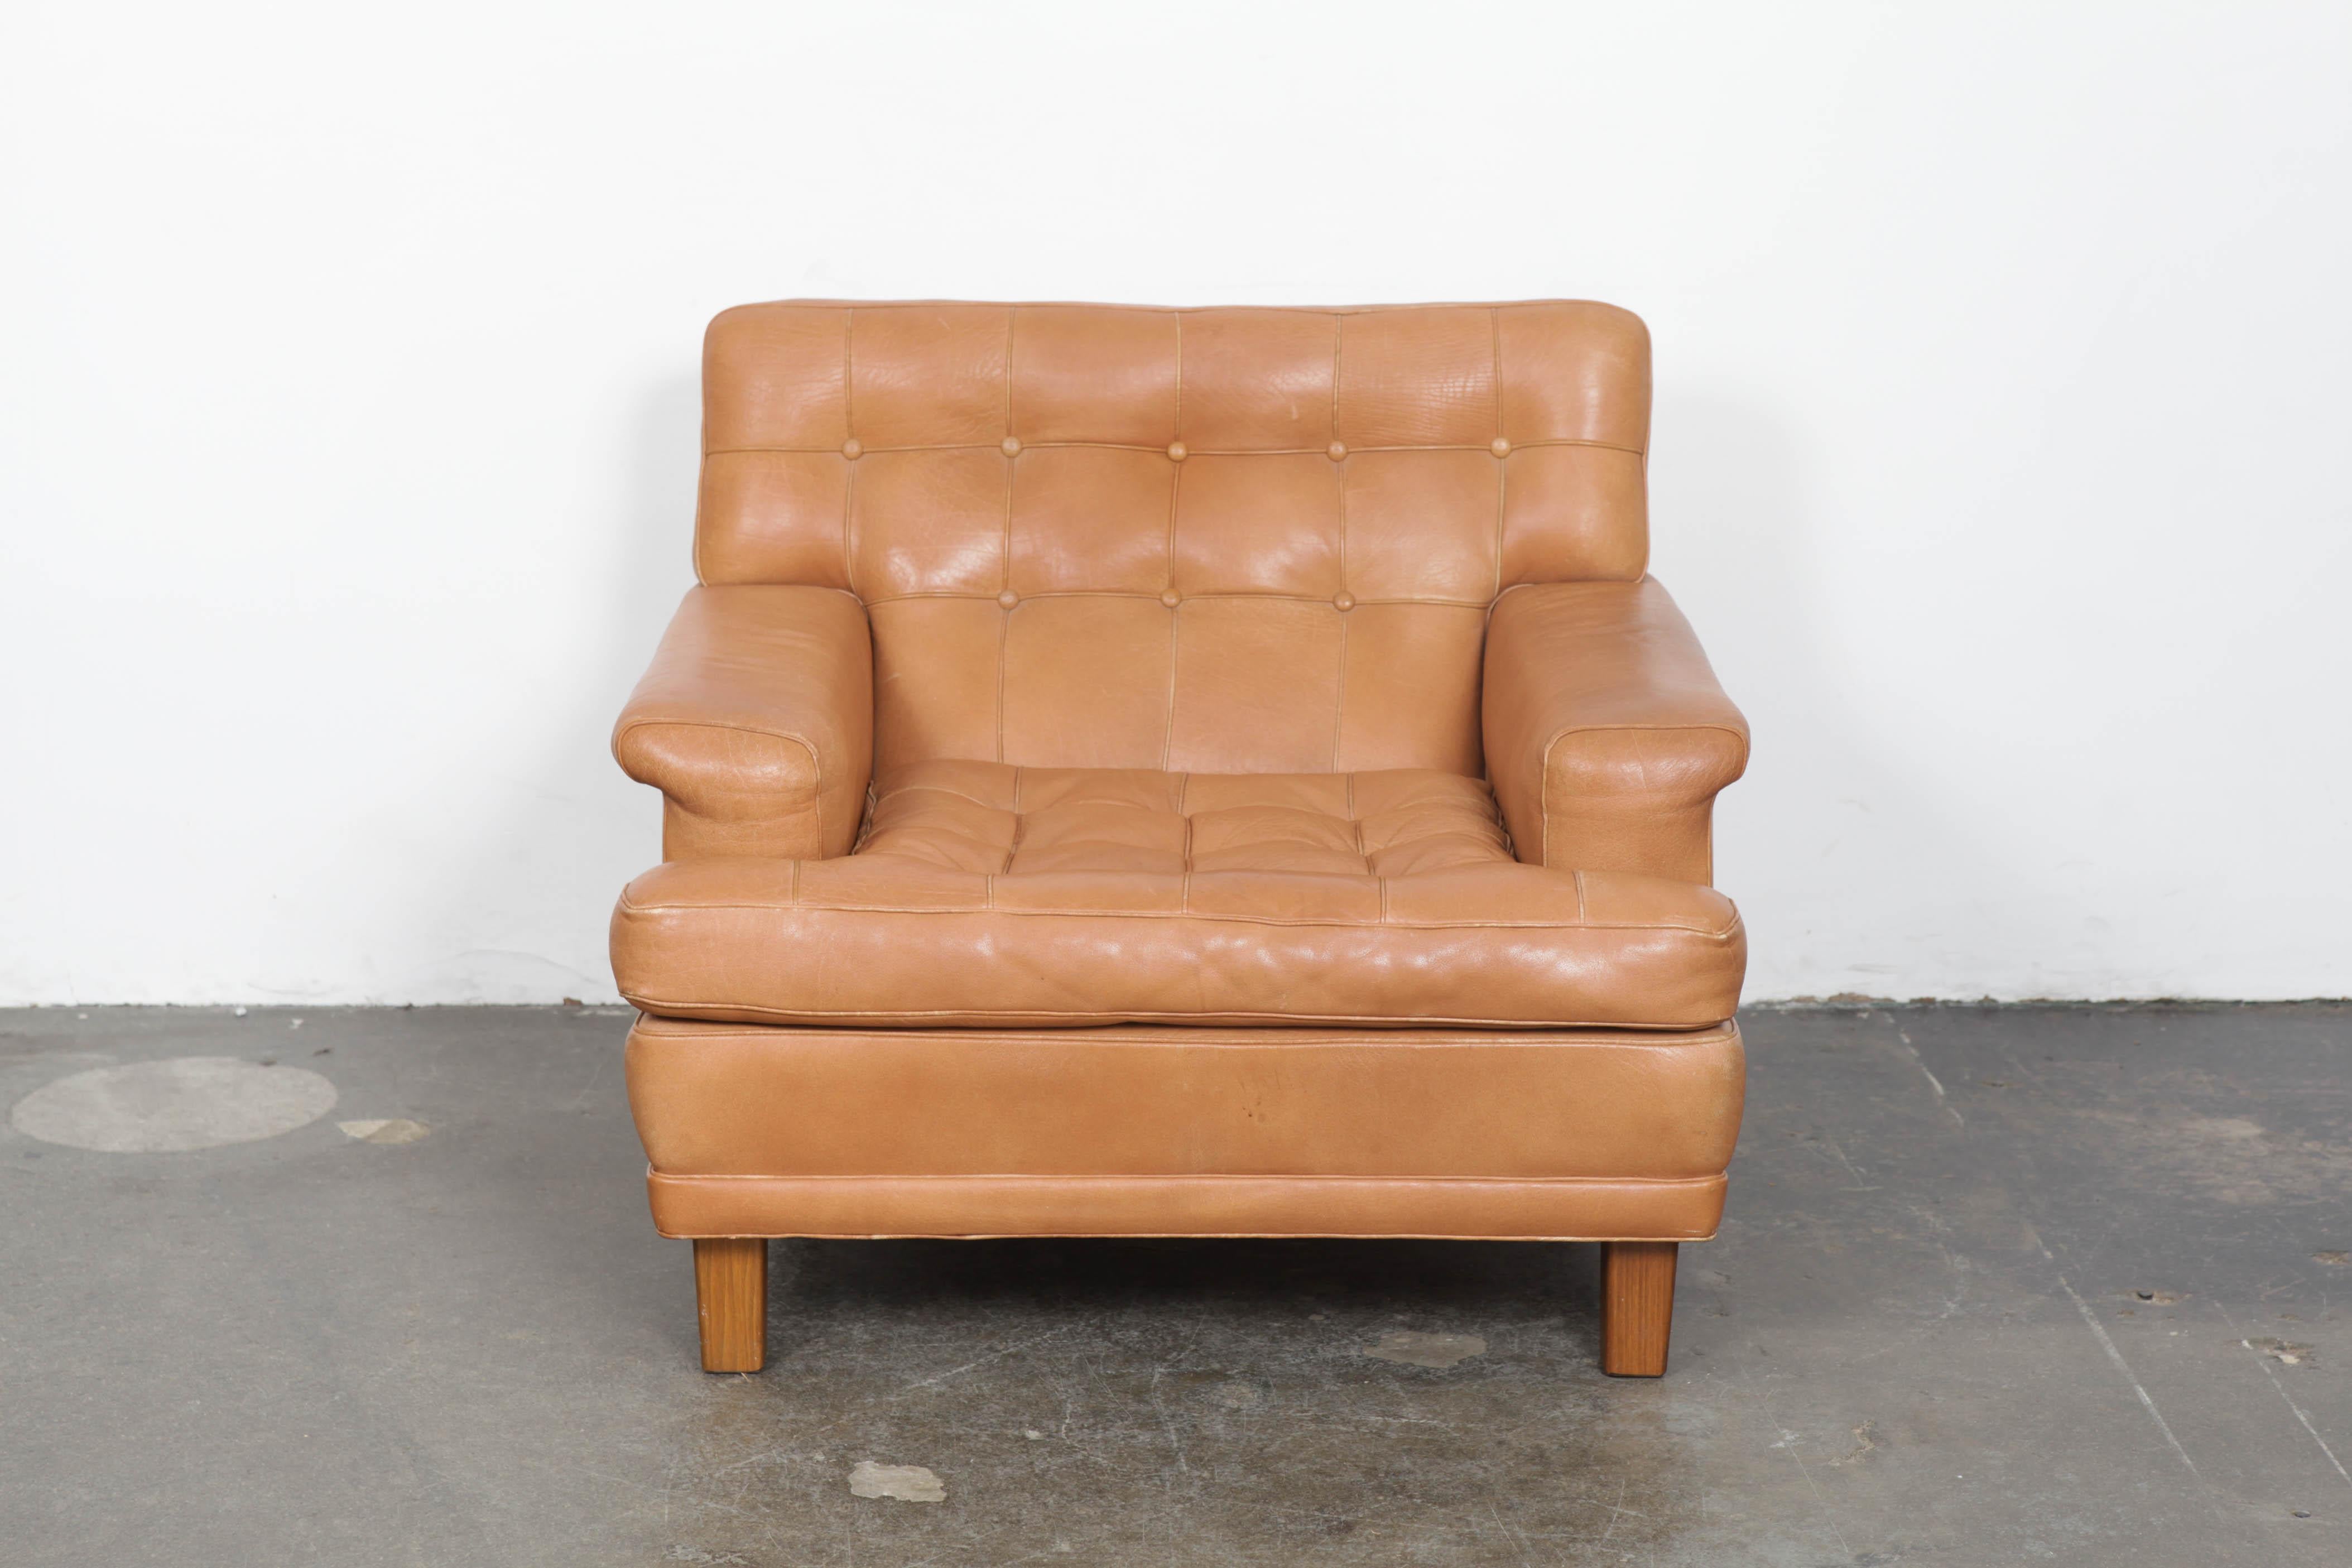 Beautiful tan color tufted and panelled leather lounge chair by Arne Norell for Norell AB, Sweden, in original leather, model 'Merkur'. Minor wear consistent with age, the leather has no tears, rips or other actual damage.